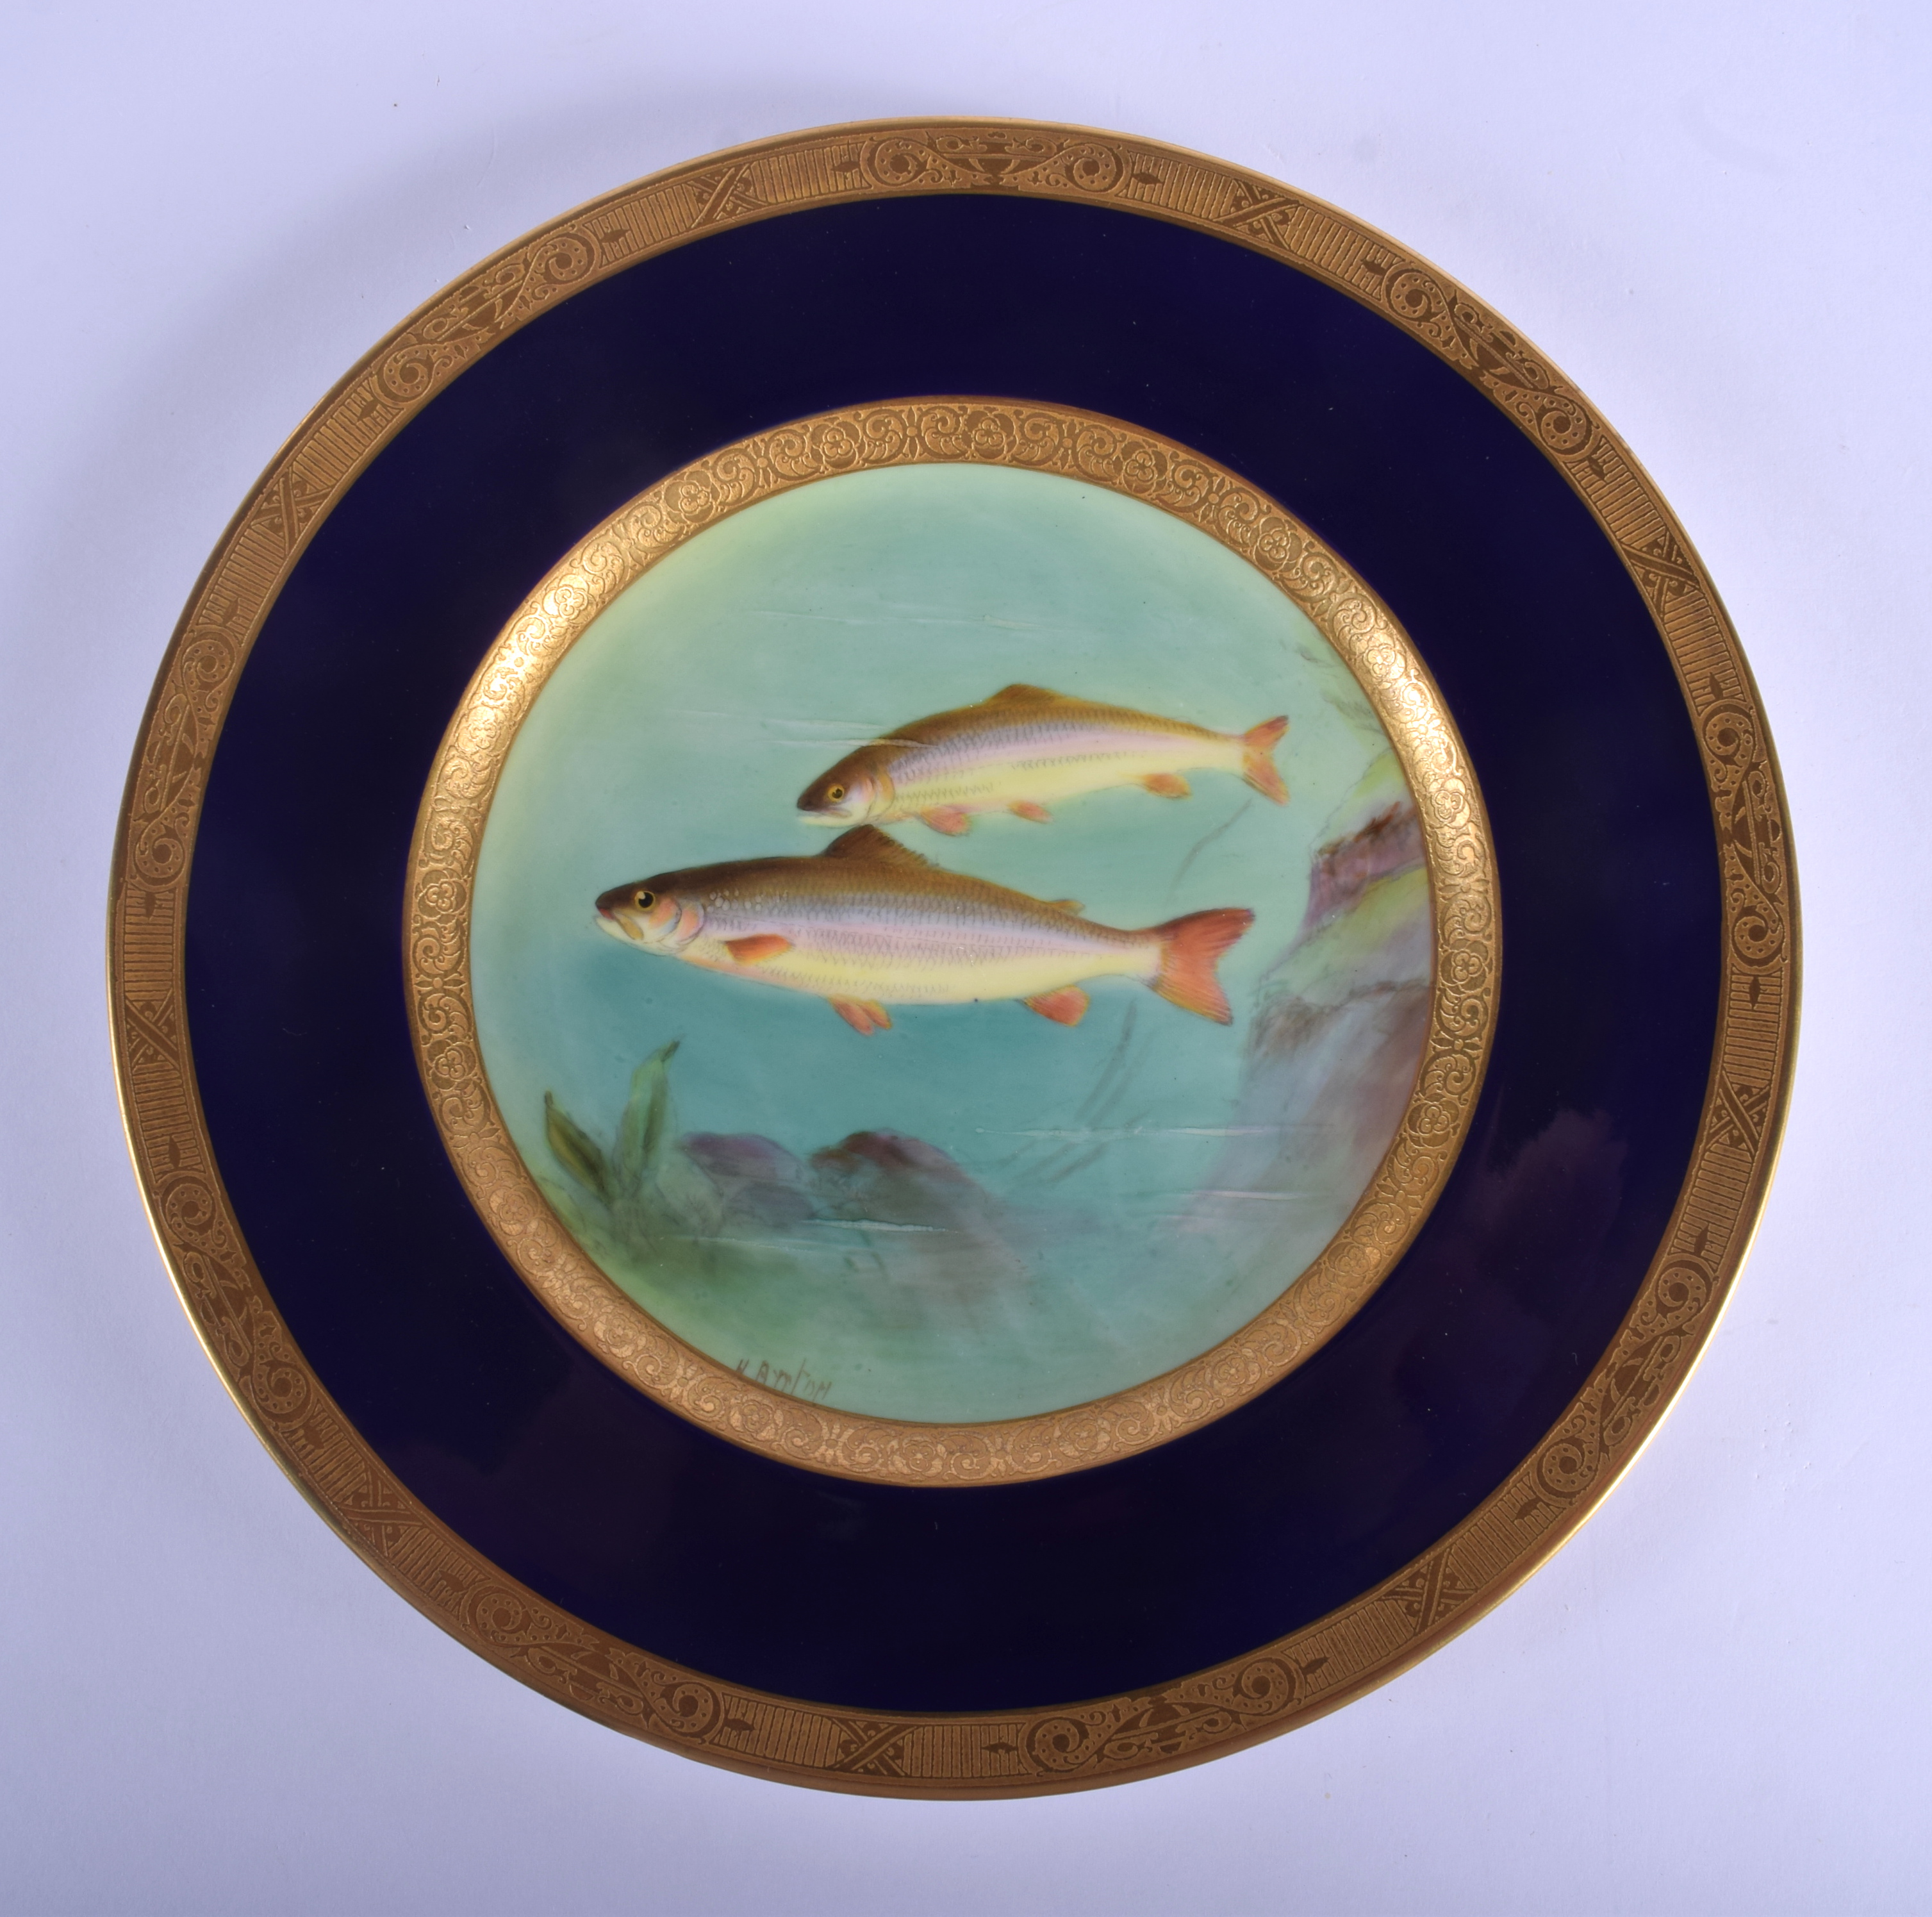 Royal Worcester fine plate painted with swimming fish, titled Char, by Harry Ayrton signed date cod